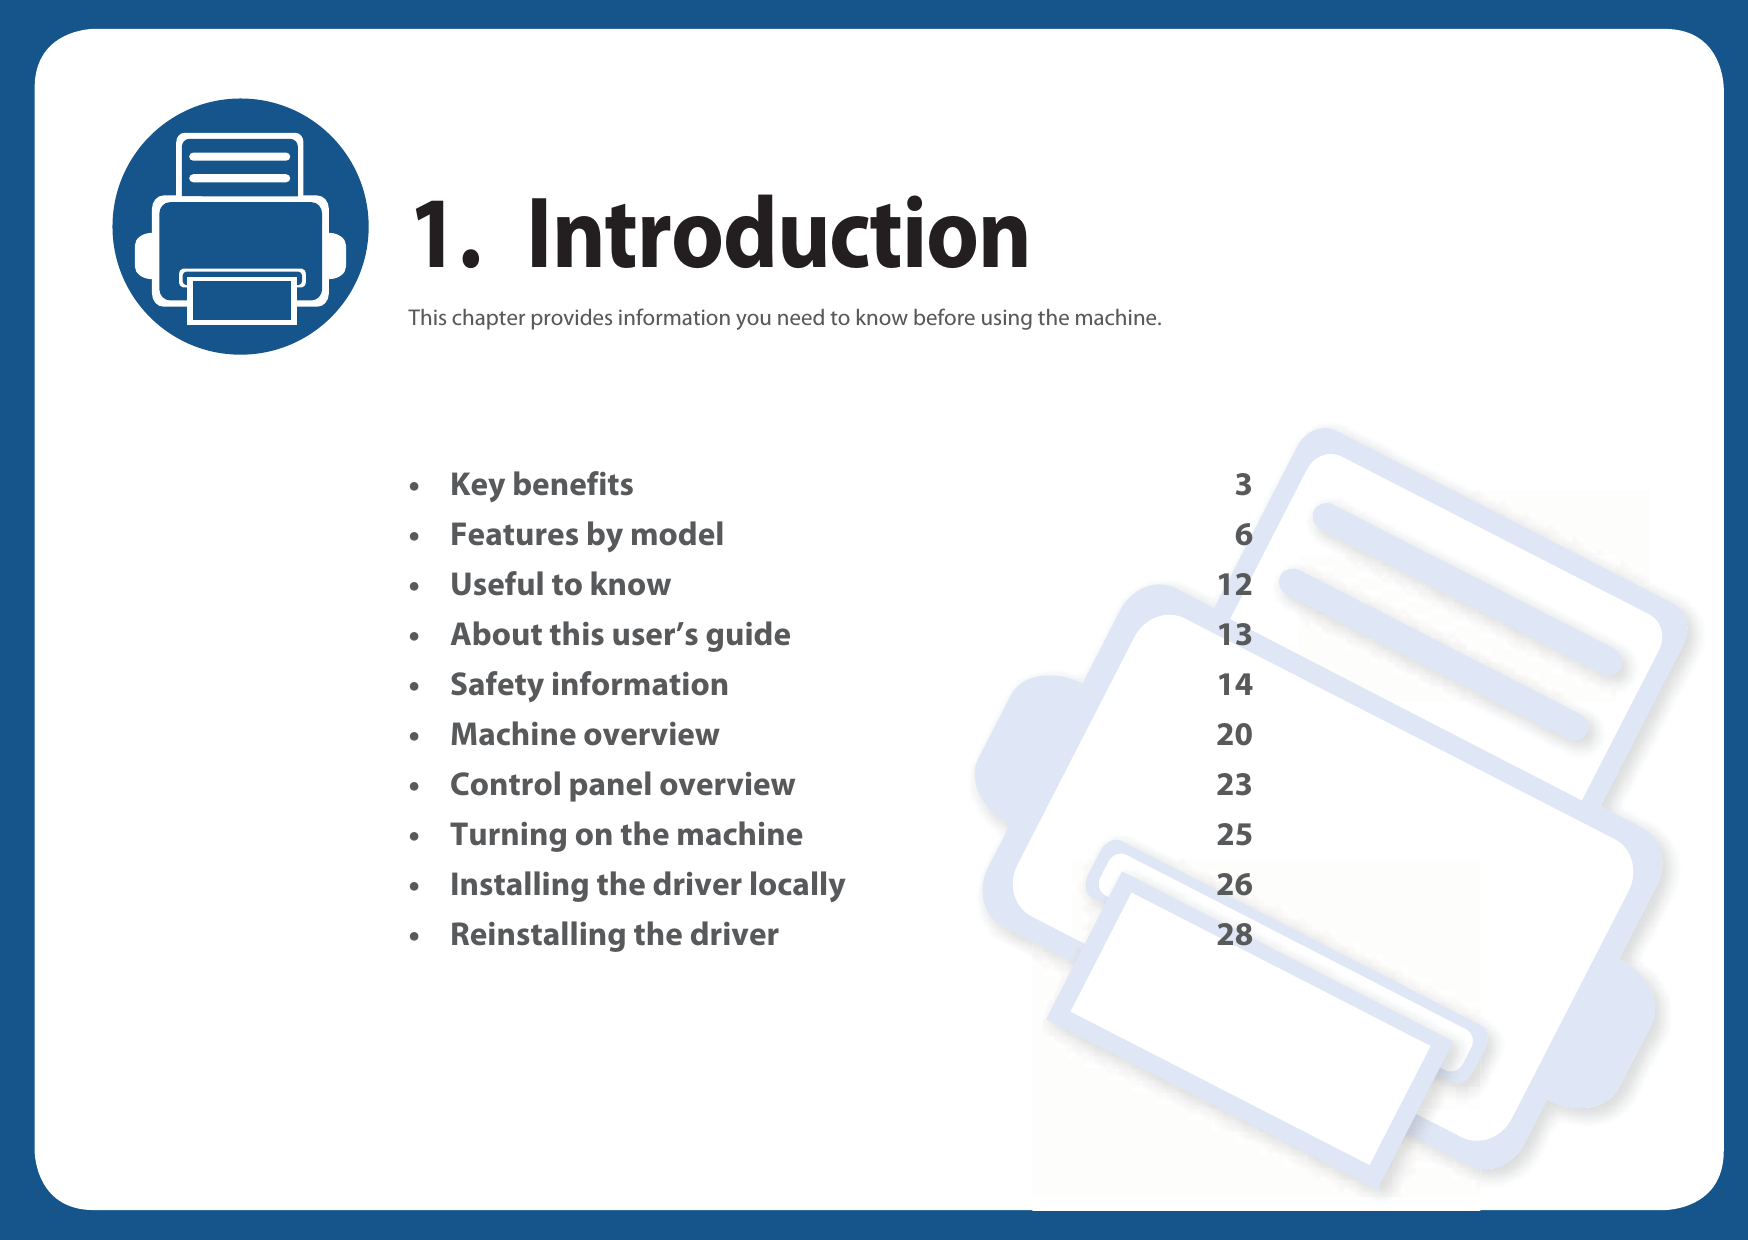 1. IntroductionThis chapter provides information you need to know before using the machine.•Key benefits 3• Features by model 6• Useful to know 12• About this user’s guide 13• Safety information 14• Machine overview 20• Control panel overview 23• Turning on the machine 25• Installing the driver locally 26• Reinstalling the driver 28